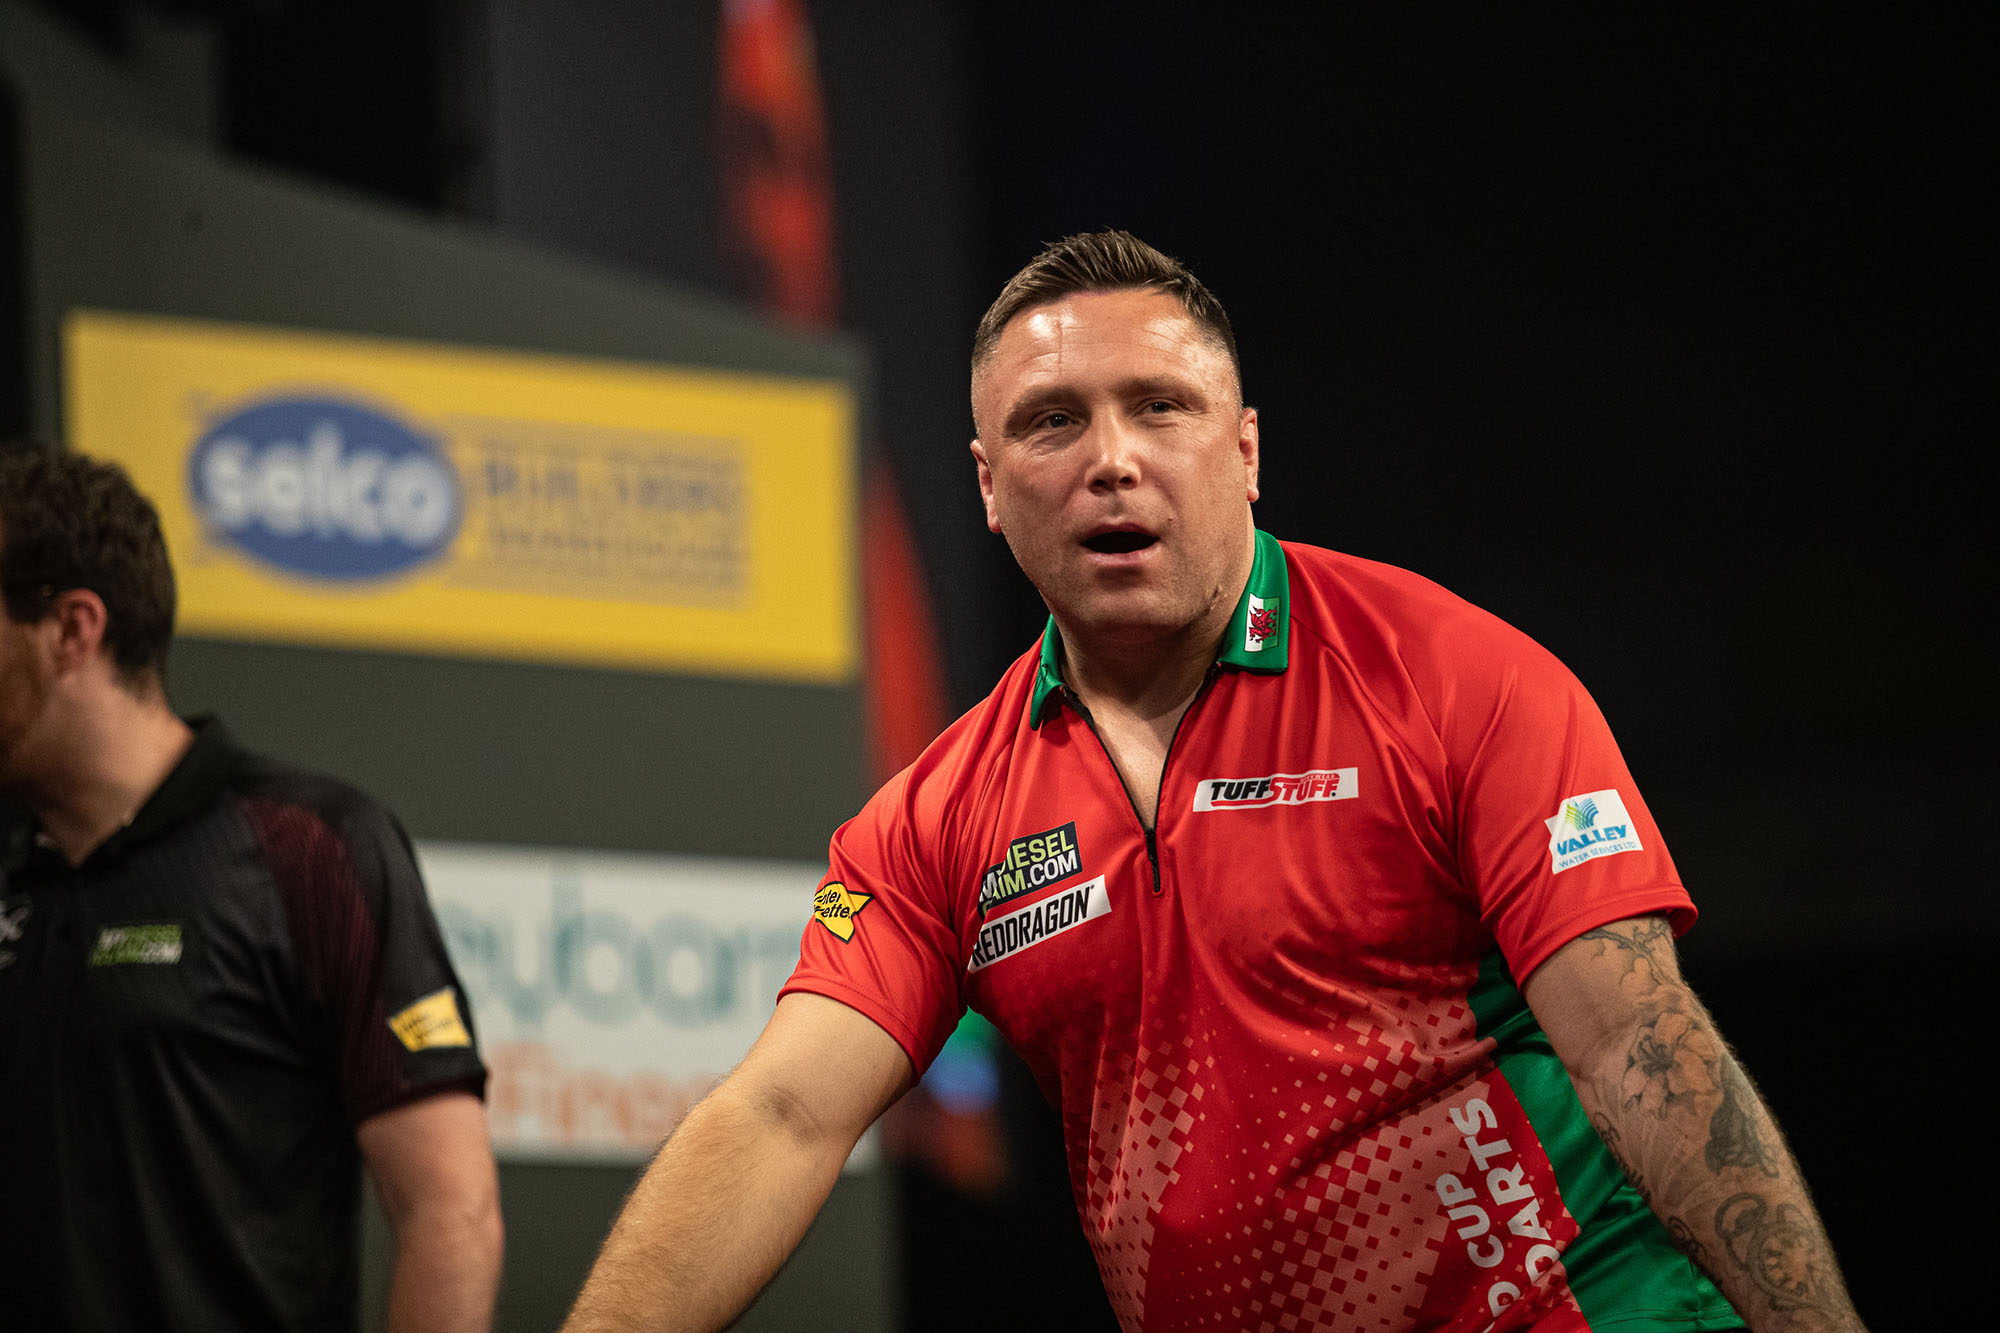 Price has been ruled out of the BetVictor World Cup of Darts